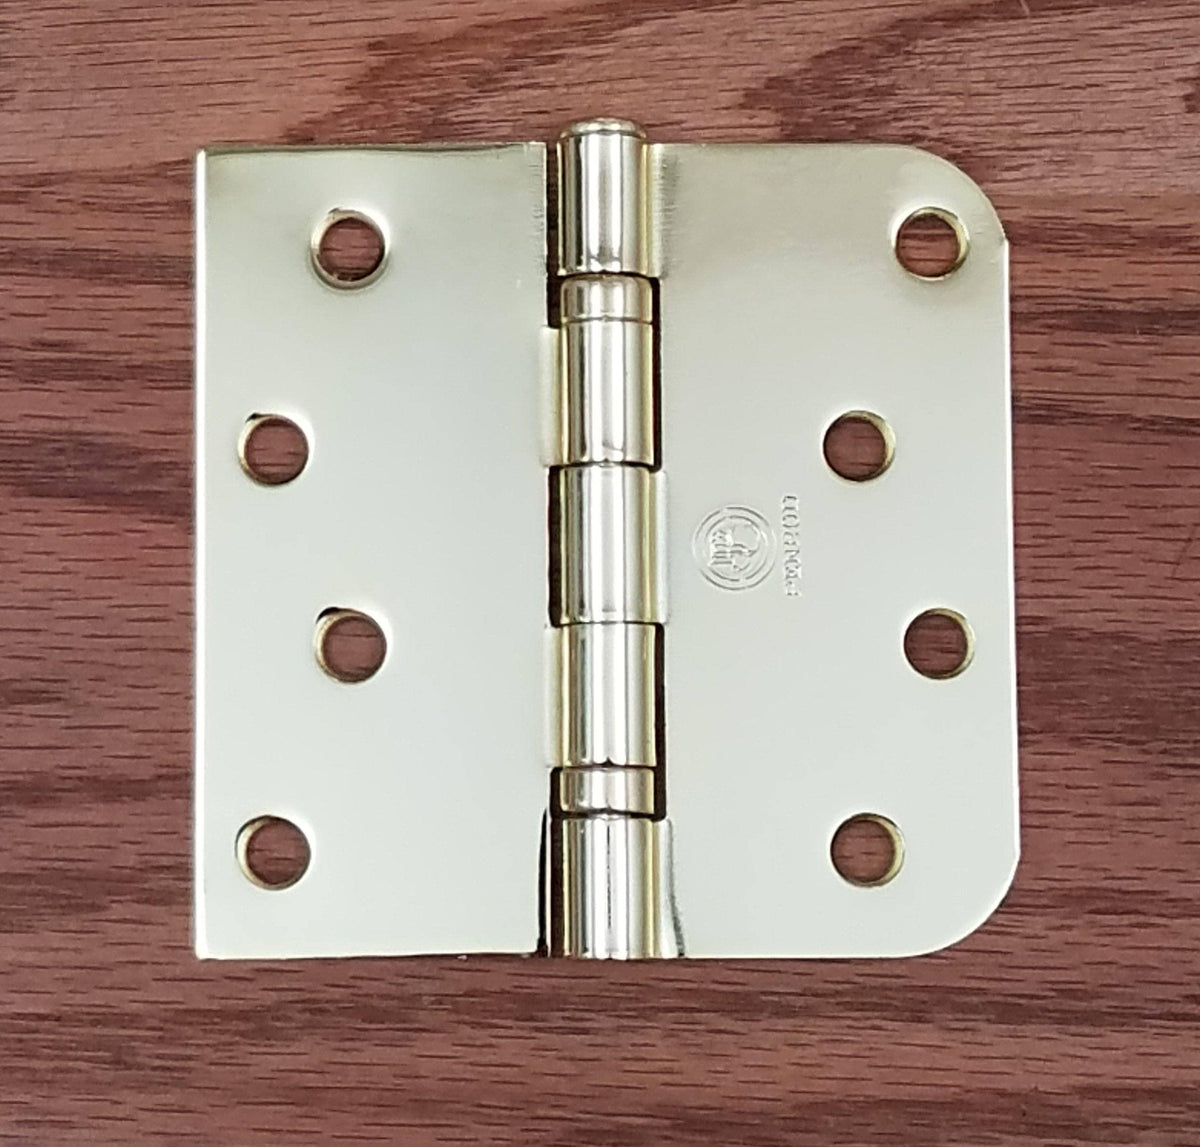 Residential Ball Bearing Hinges - Ball Bearing Door Hinges 4" Square With 5/8" Radius Corners - Multiple Finishes - 2 Pack